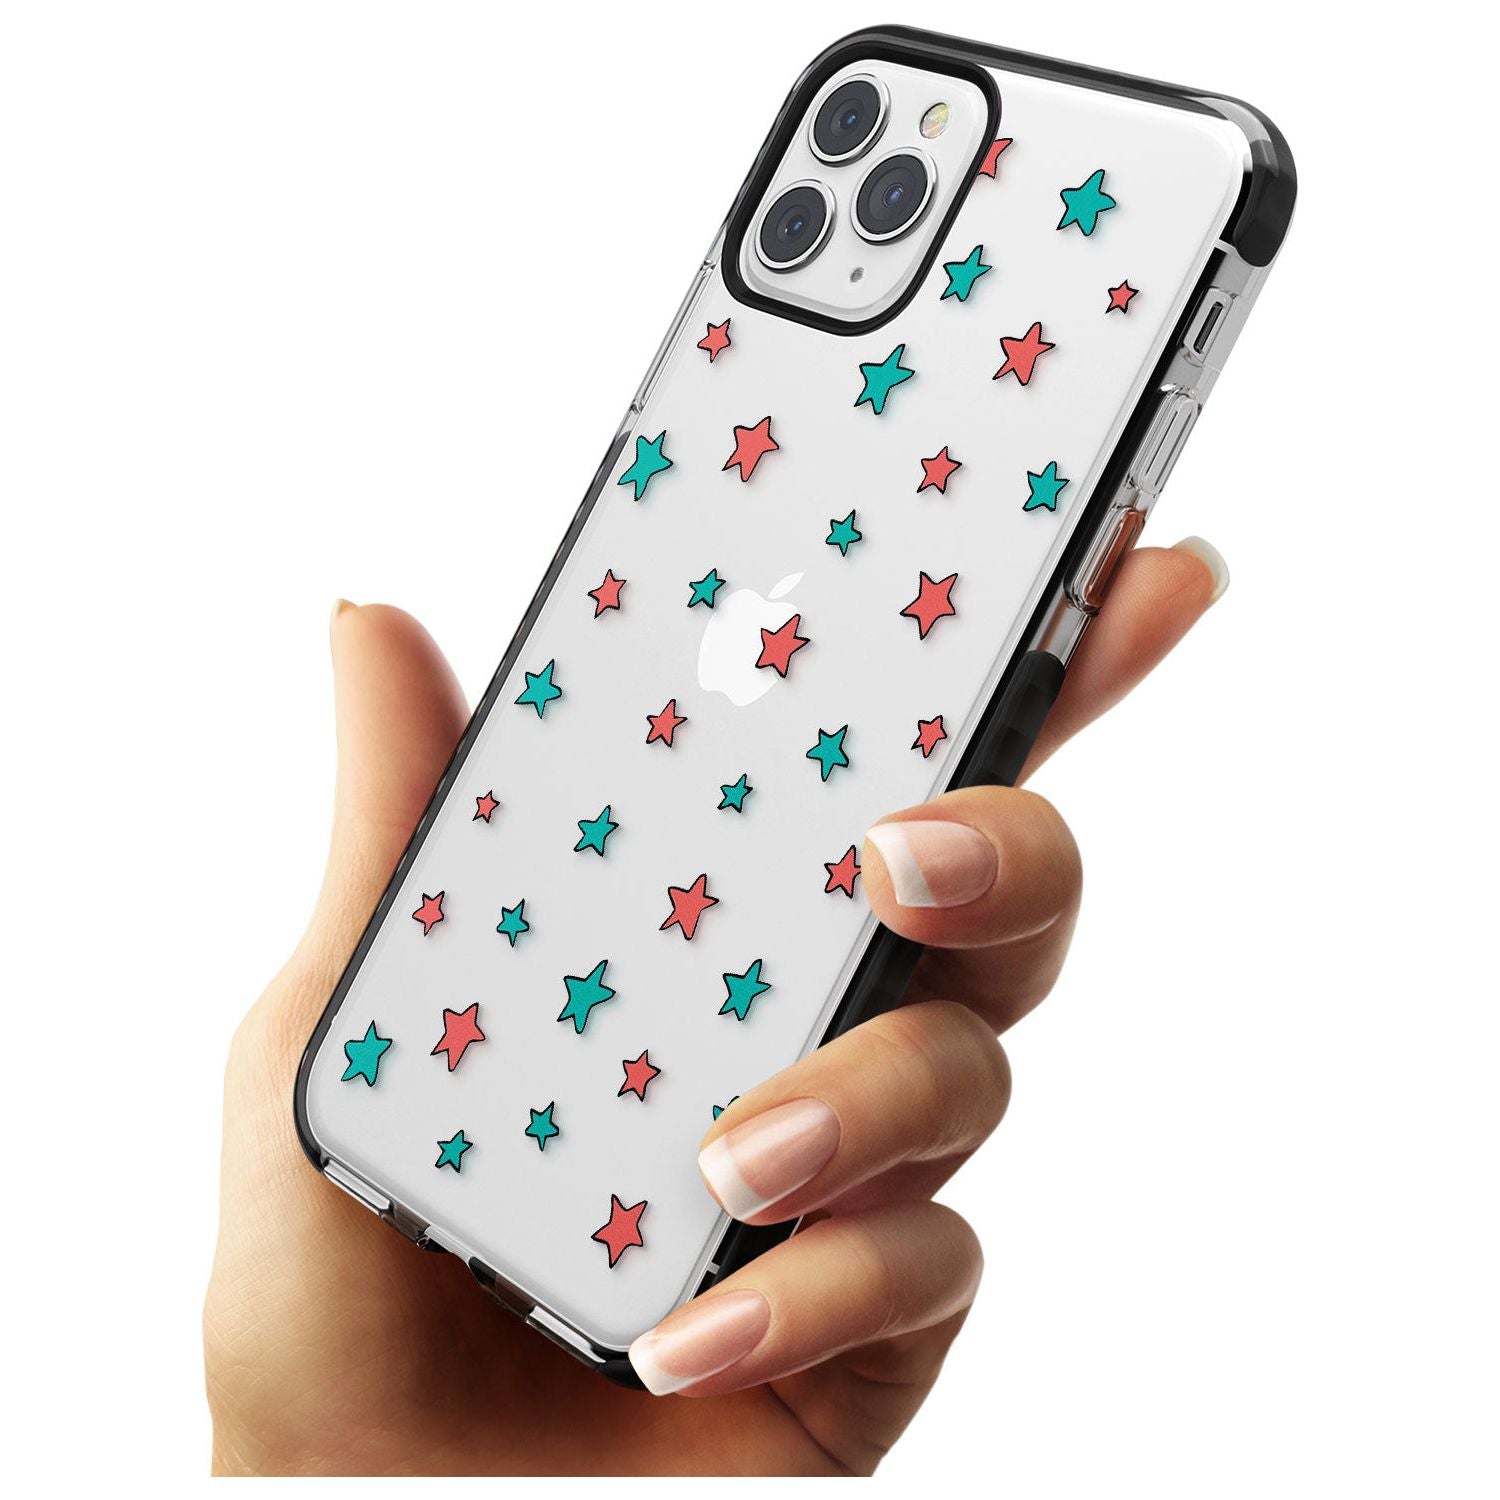 Heartstopper Stars Pattern Black Impact Phone Case for iPhone 11